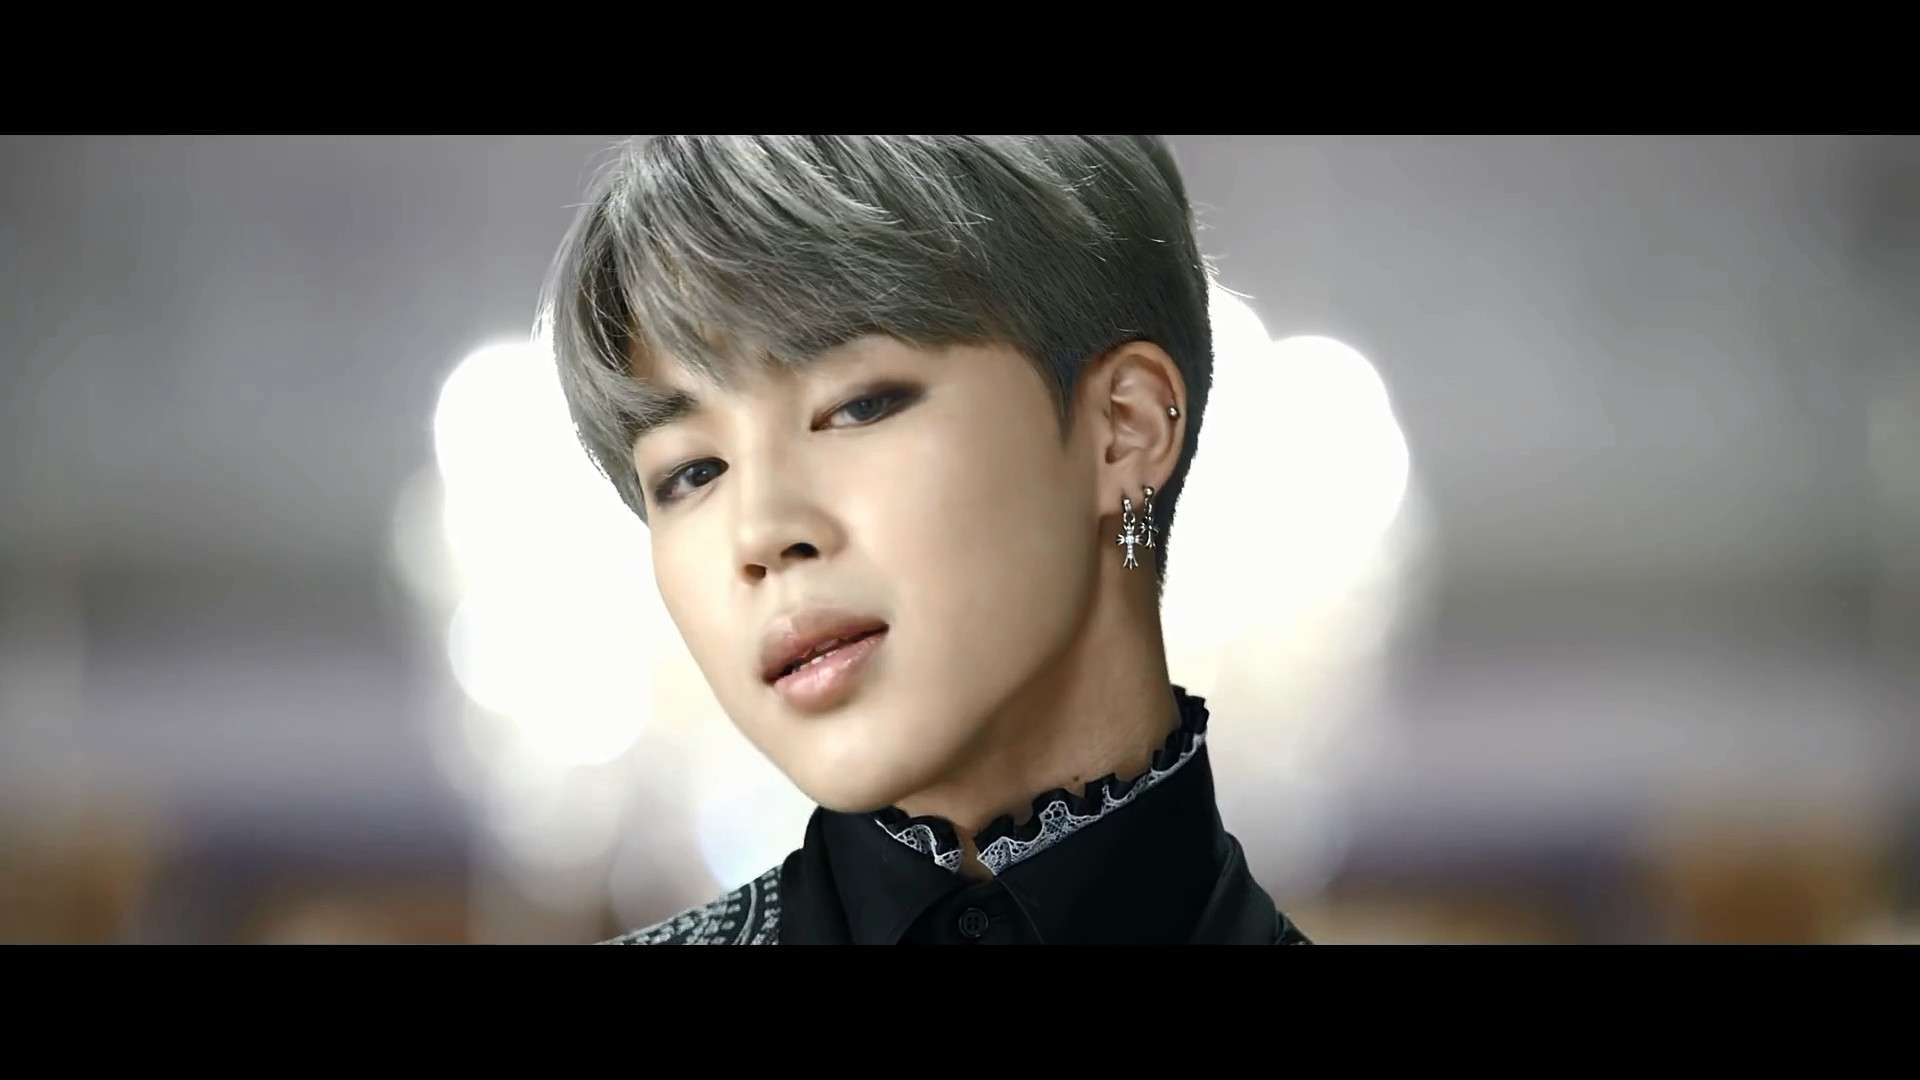 Jimin's Iconic Messy Blonde Hair in "Blood Sweat & Tears" Performance - wide 9